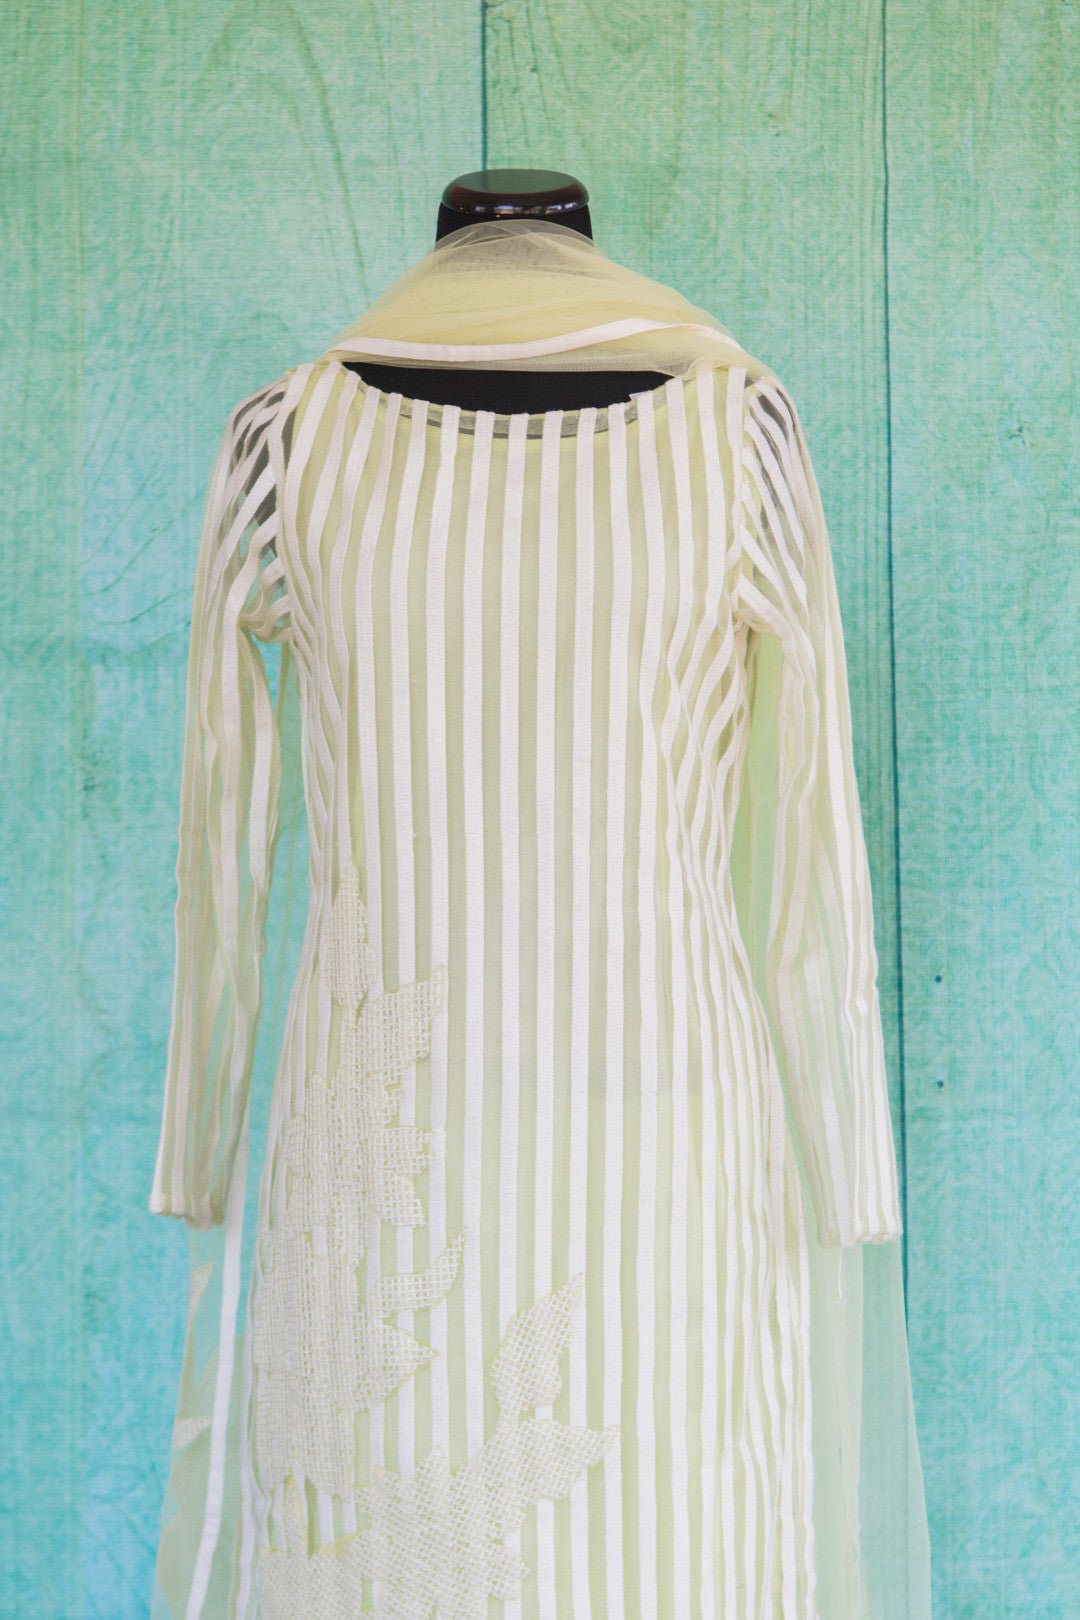 501073-suit-long-sleeve-pale-green-white-striped-scarf-top-view